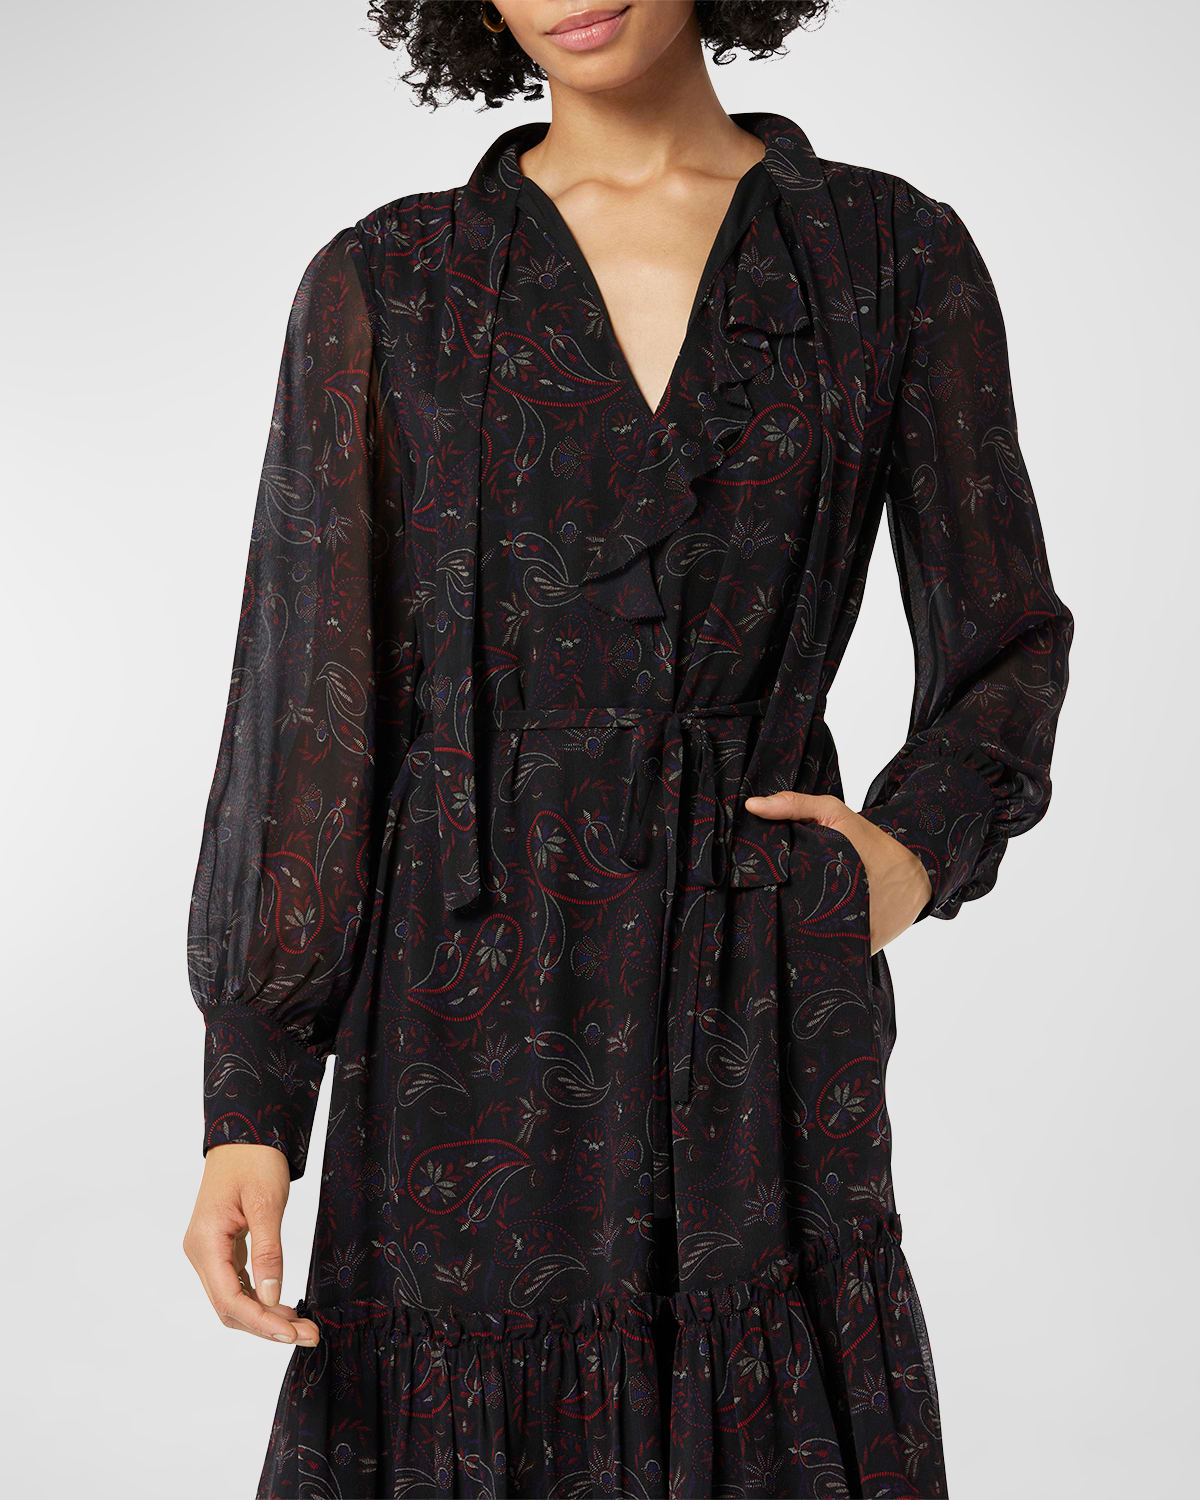 JOIE ROUSSEL RUCHED PAISLEY-PRINT MIDI DRESS